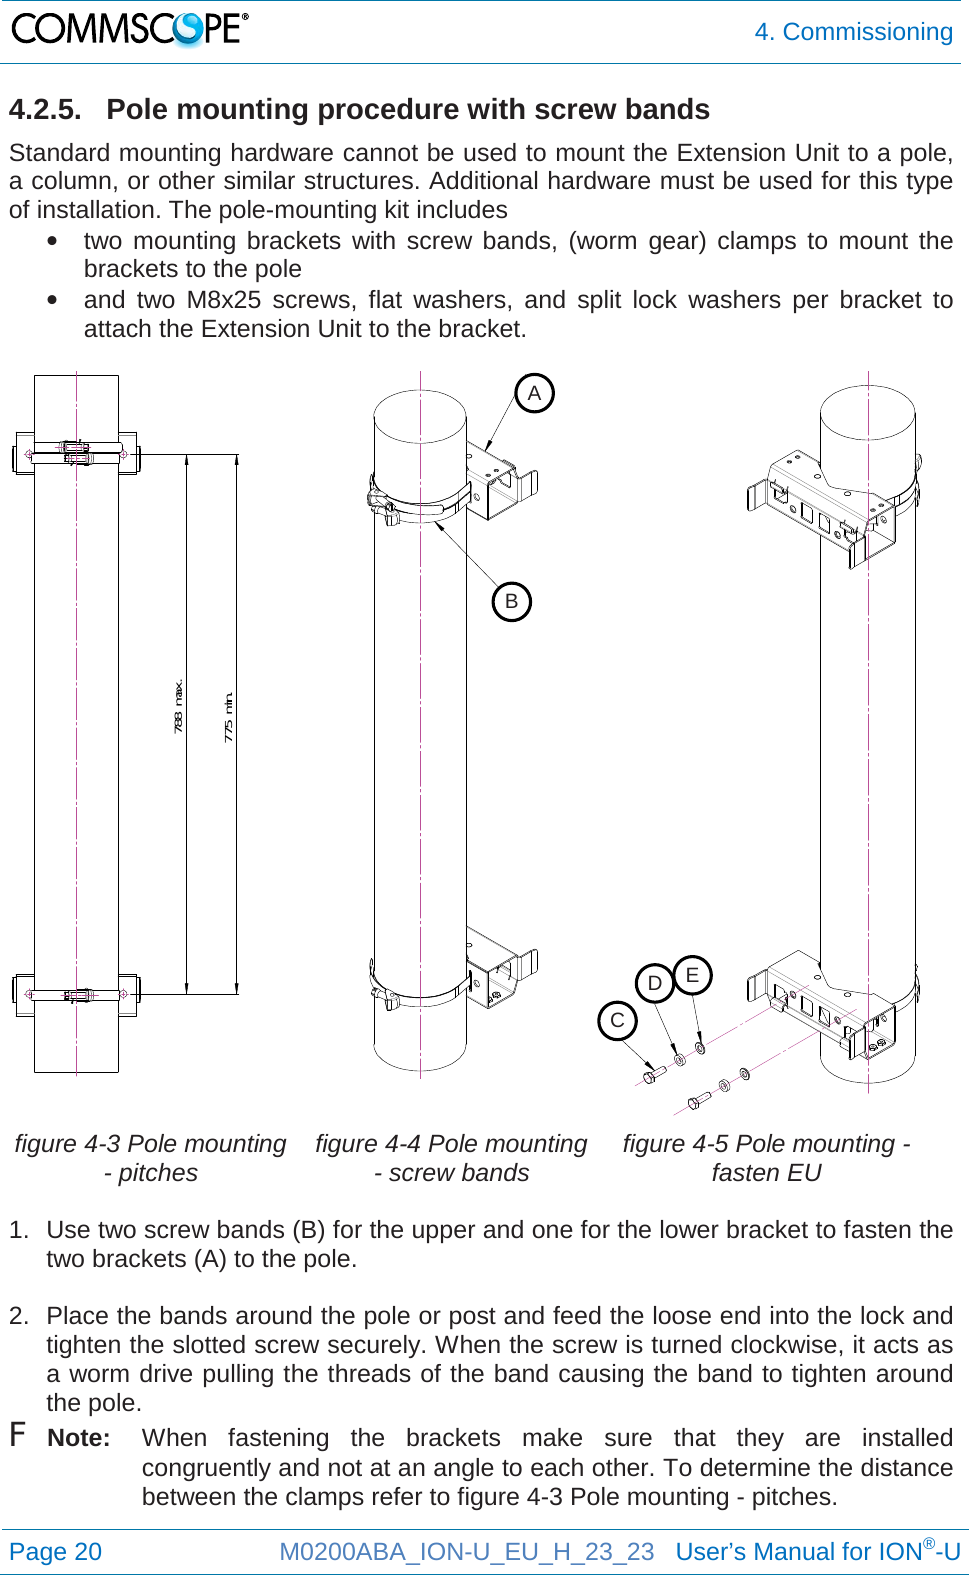  4. Commissioning  Page 20 M0200ABA_ION-U_EU_H_23_23   User’s Manual for ION®-U  4.2.5. Pole mounting procedure with screw bands Standard mounting hardware cannot be used to mount the Extension Unit to a pole, a column, or other similar structures. Additional hardware must be used for this type of installation. The pole-mounting kit includes • two mounting brackets with screw bands, (worm gear) clamps to mount the brackets to the pole • and two M8x25 screws, flat washers, and split  lock washers per bracket to attach the Extension Unit to the bracket.     figure 4-3 Pole mounting - pitches figure 4-4 Pole mounting - screw bands figure 4-5 Pole mounting - fasten EU  1. Use two screw bands (B) for the upper and one for the lower bracket to fasten the two brackets (A) to the pole.  2. Place the bands around the pole or post and feed the loose end into the lock and tighten the slotted screw securely. When the screw is turned clockwise, it acts as a worm drive pulling the threads of the band causing the band to tighten around the pole. F Note: When fastening the brackets make sure that they are installed congruently and not at an angle to each other. To determine the distance between the clamps refer to figure 4-3 Pole mounting - pitches.   775 min.788 max.A B C D E 